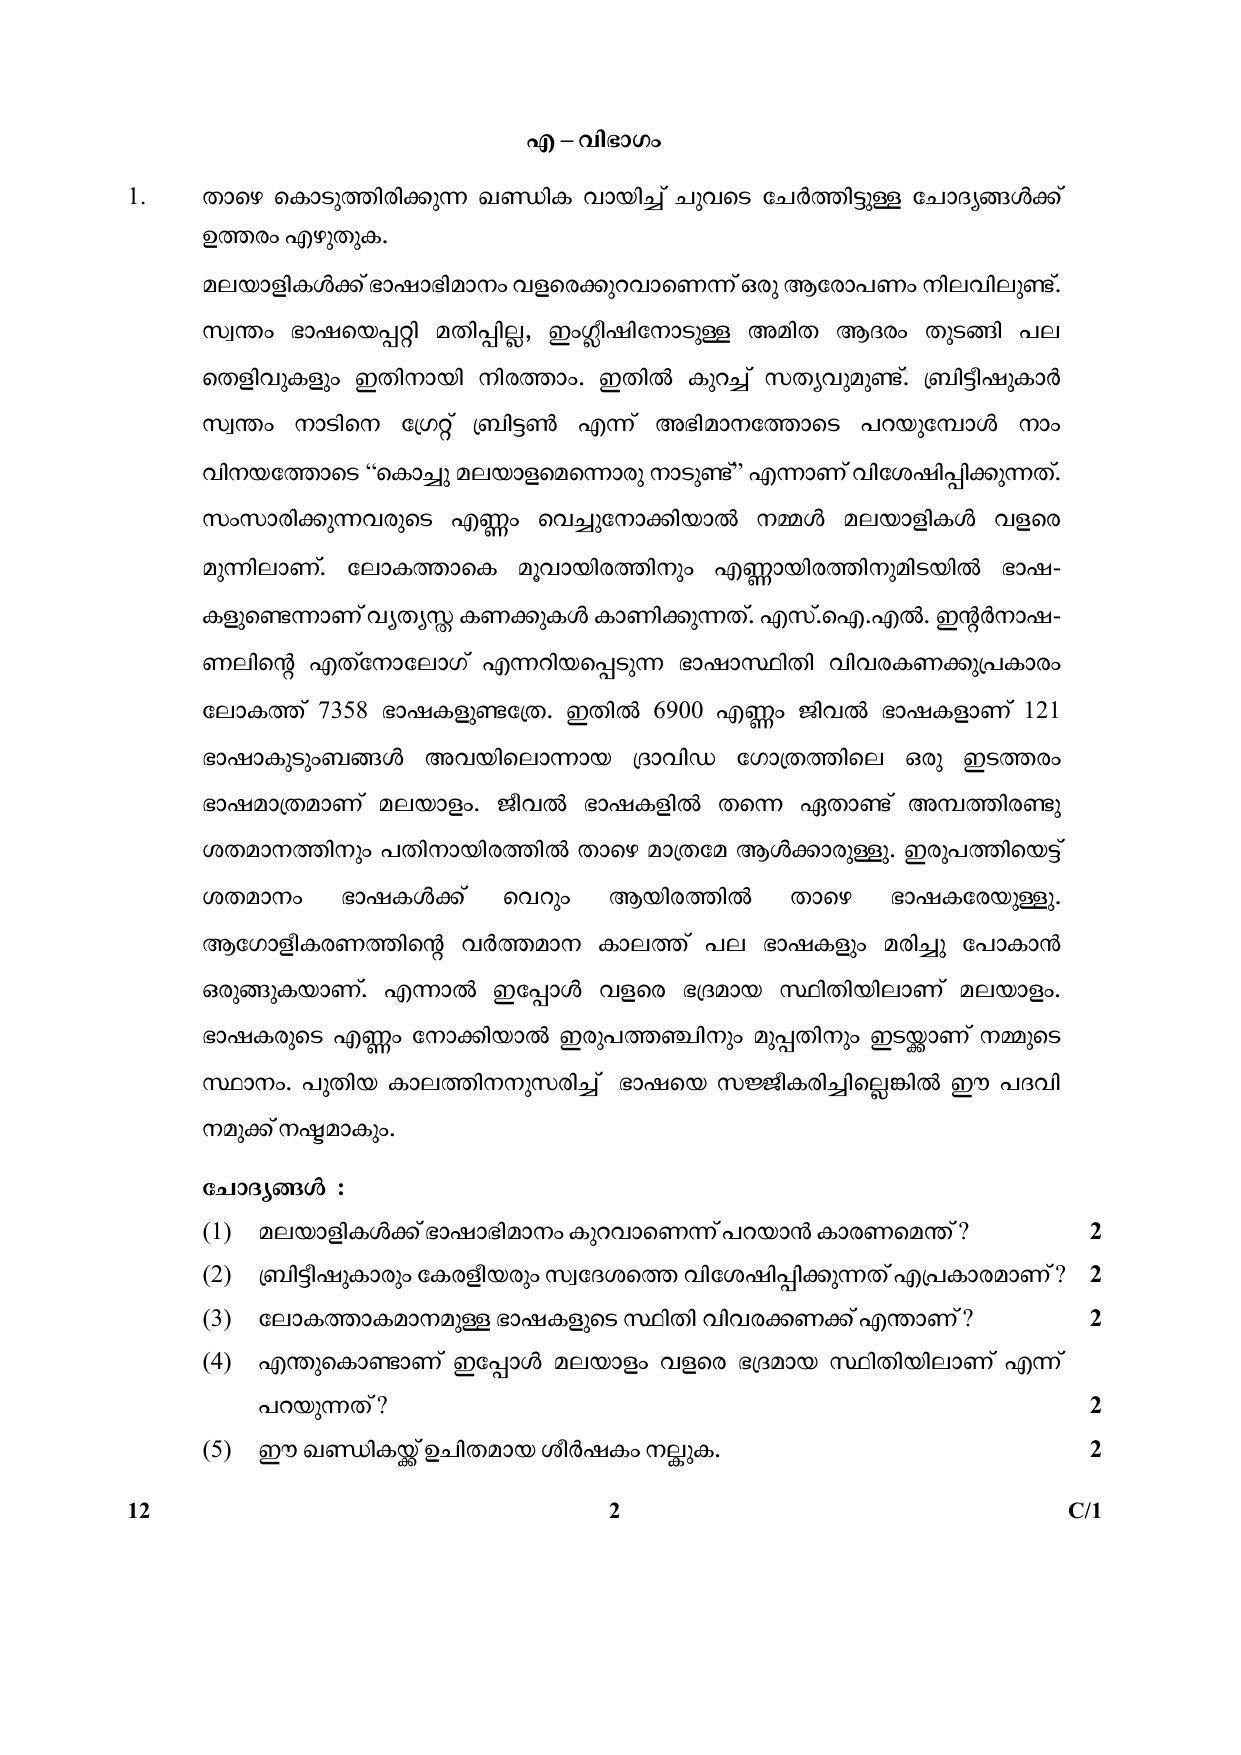 CBSE Class 10 12 (Malayalam) 2018 Compartment Question Paper - Page 2